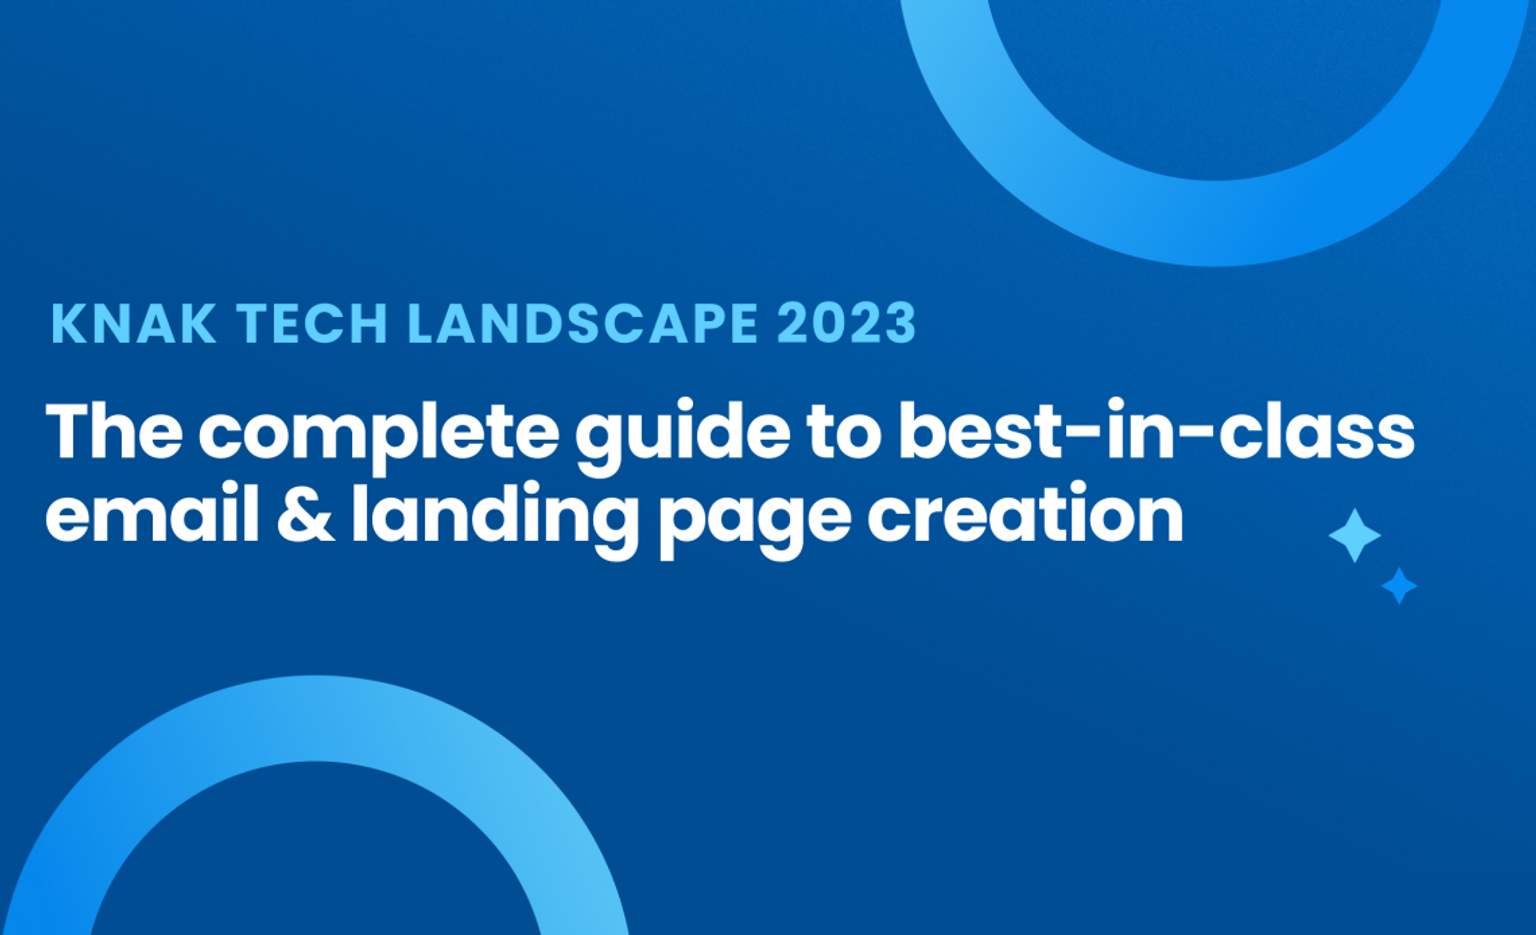 The complete guide to best-in-class email and landing page creation